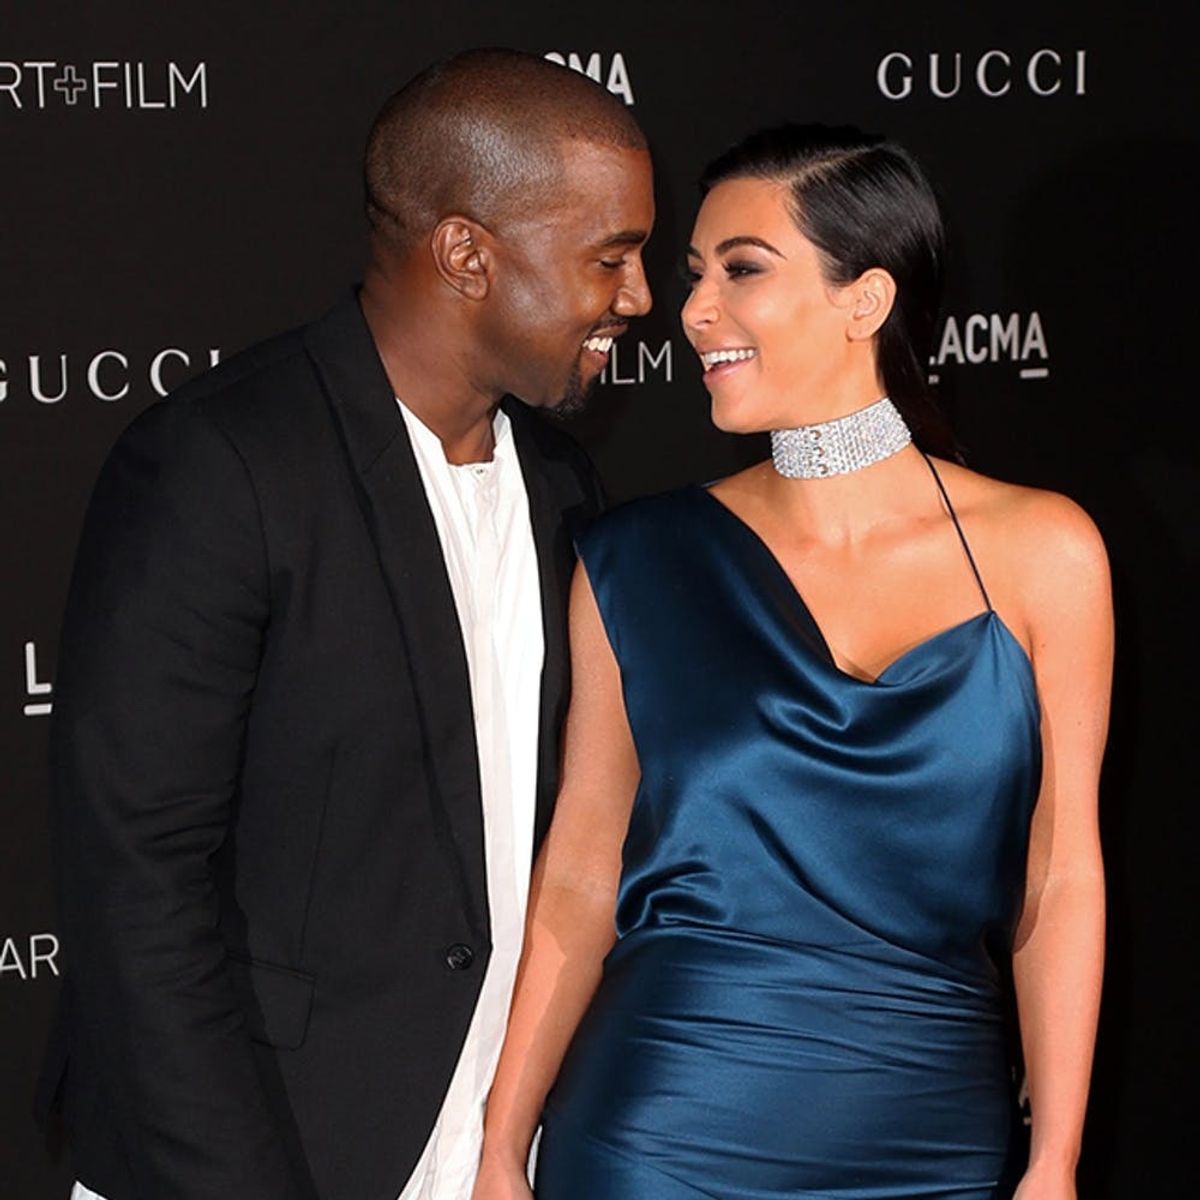 You May Be Surprised by This Kim + Kanye Baby Name Rumor